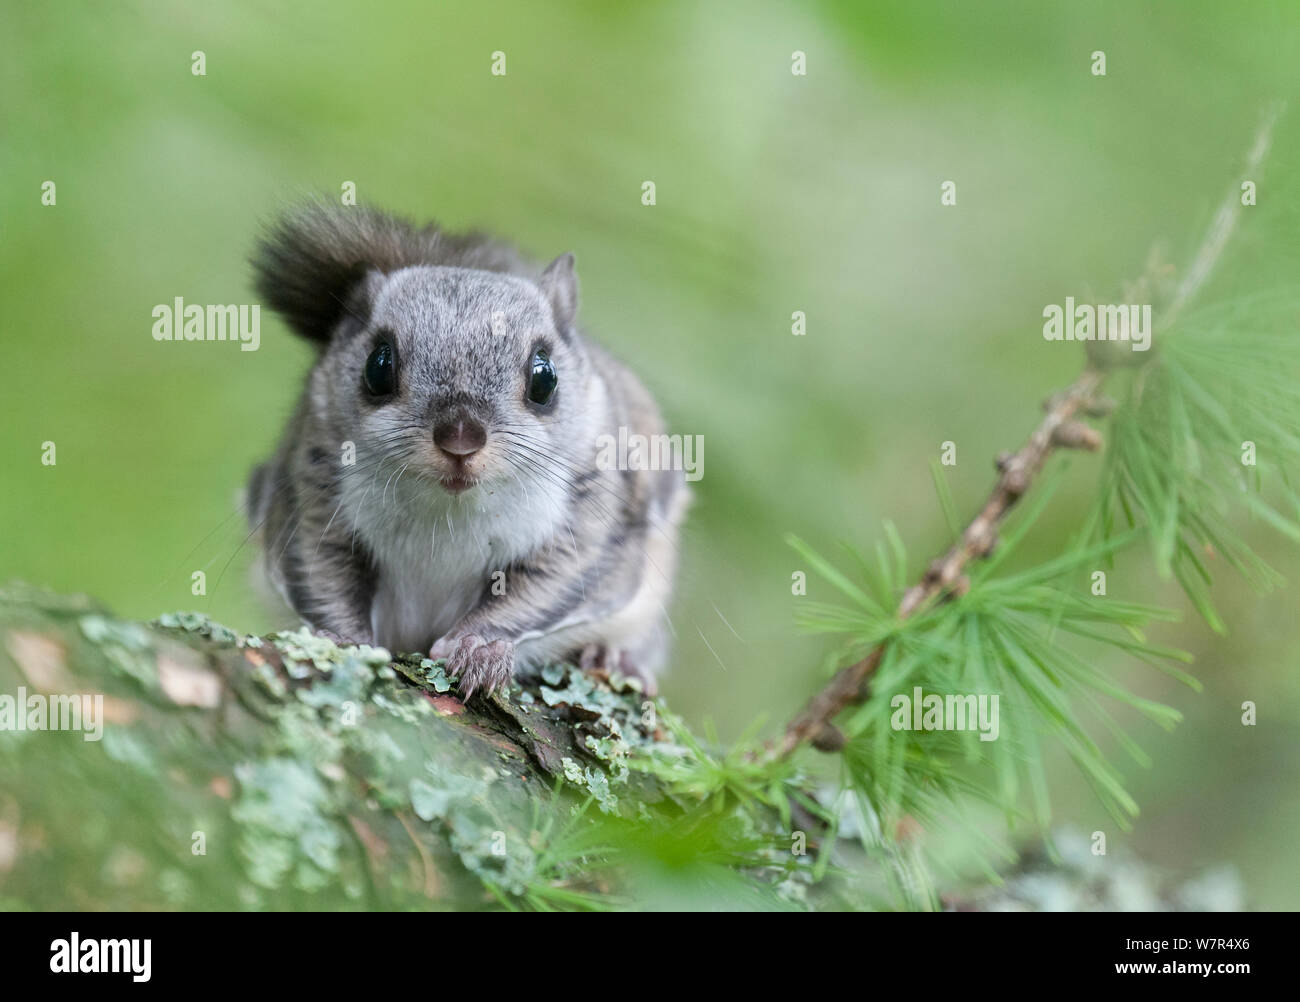 Siberian flying squirrel (Pteromys volans) portrait, Finland, May Stock Photo